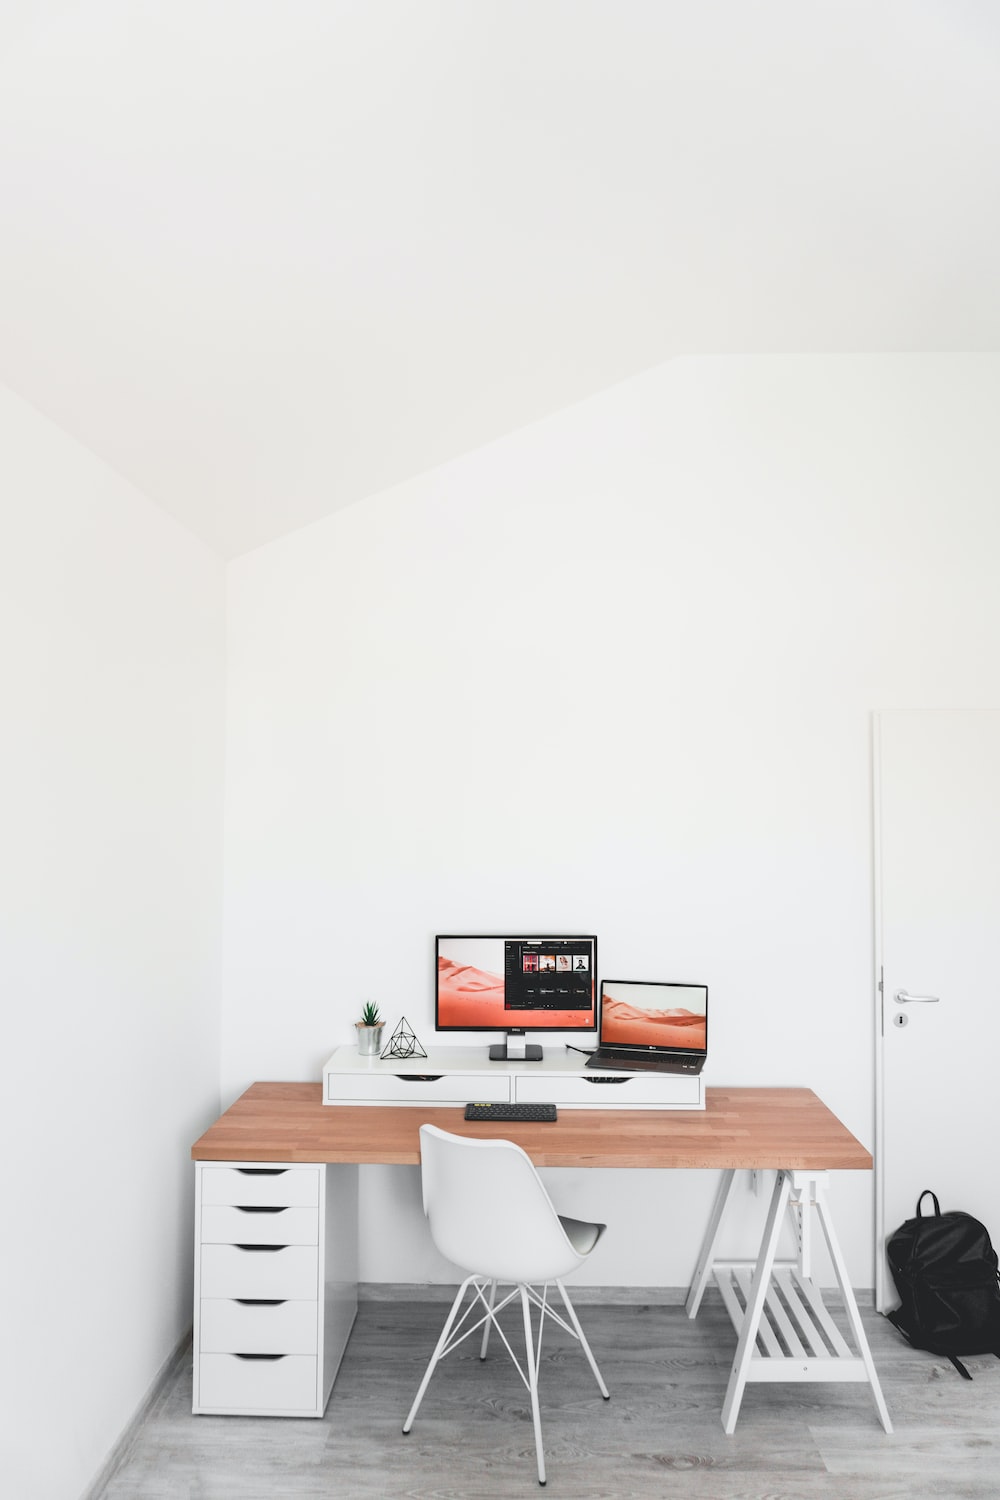 Should I put a desk in my bedroom?